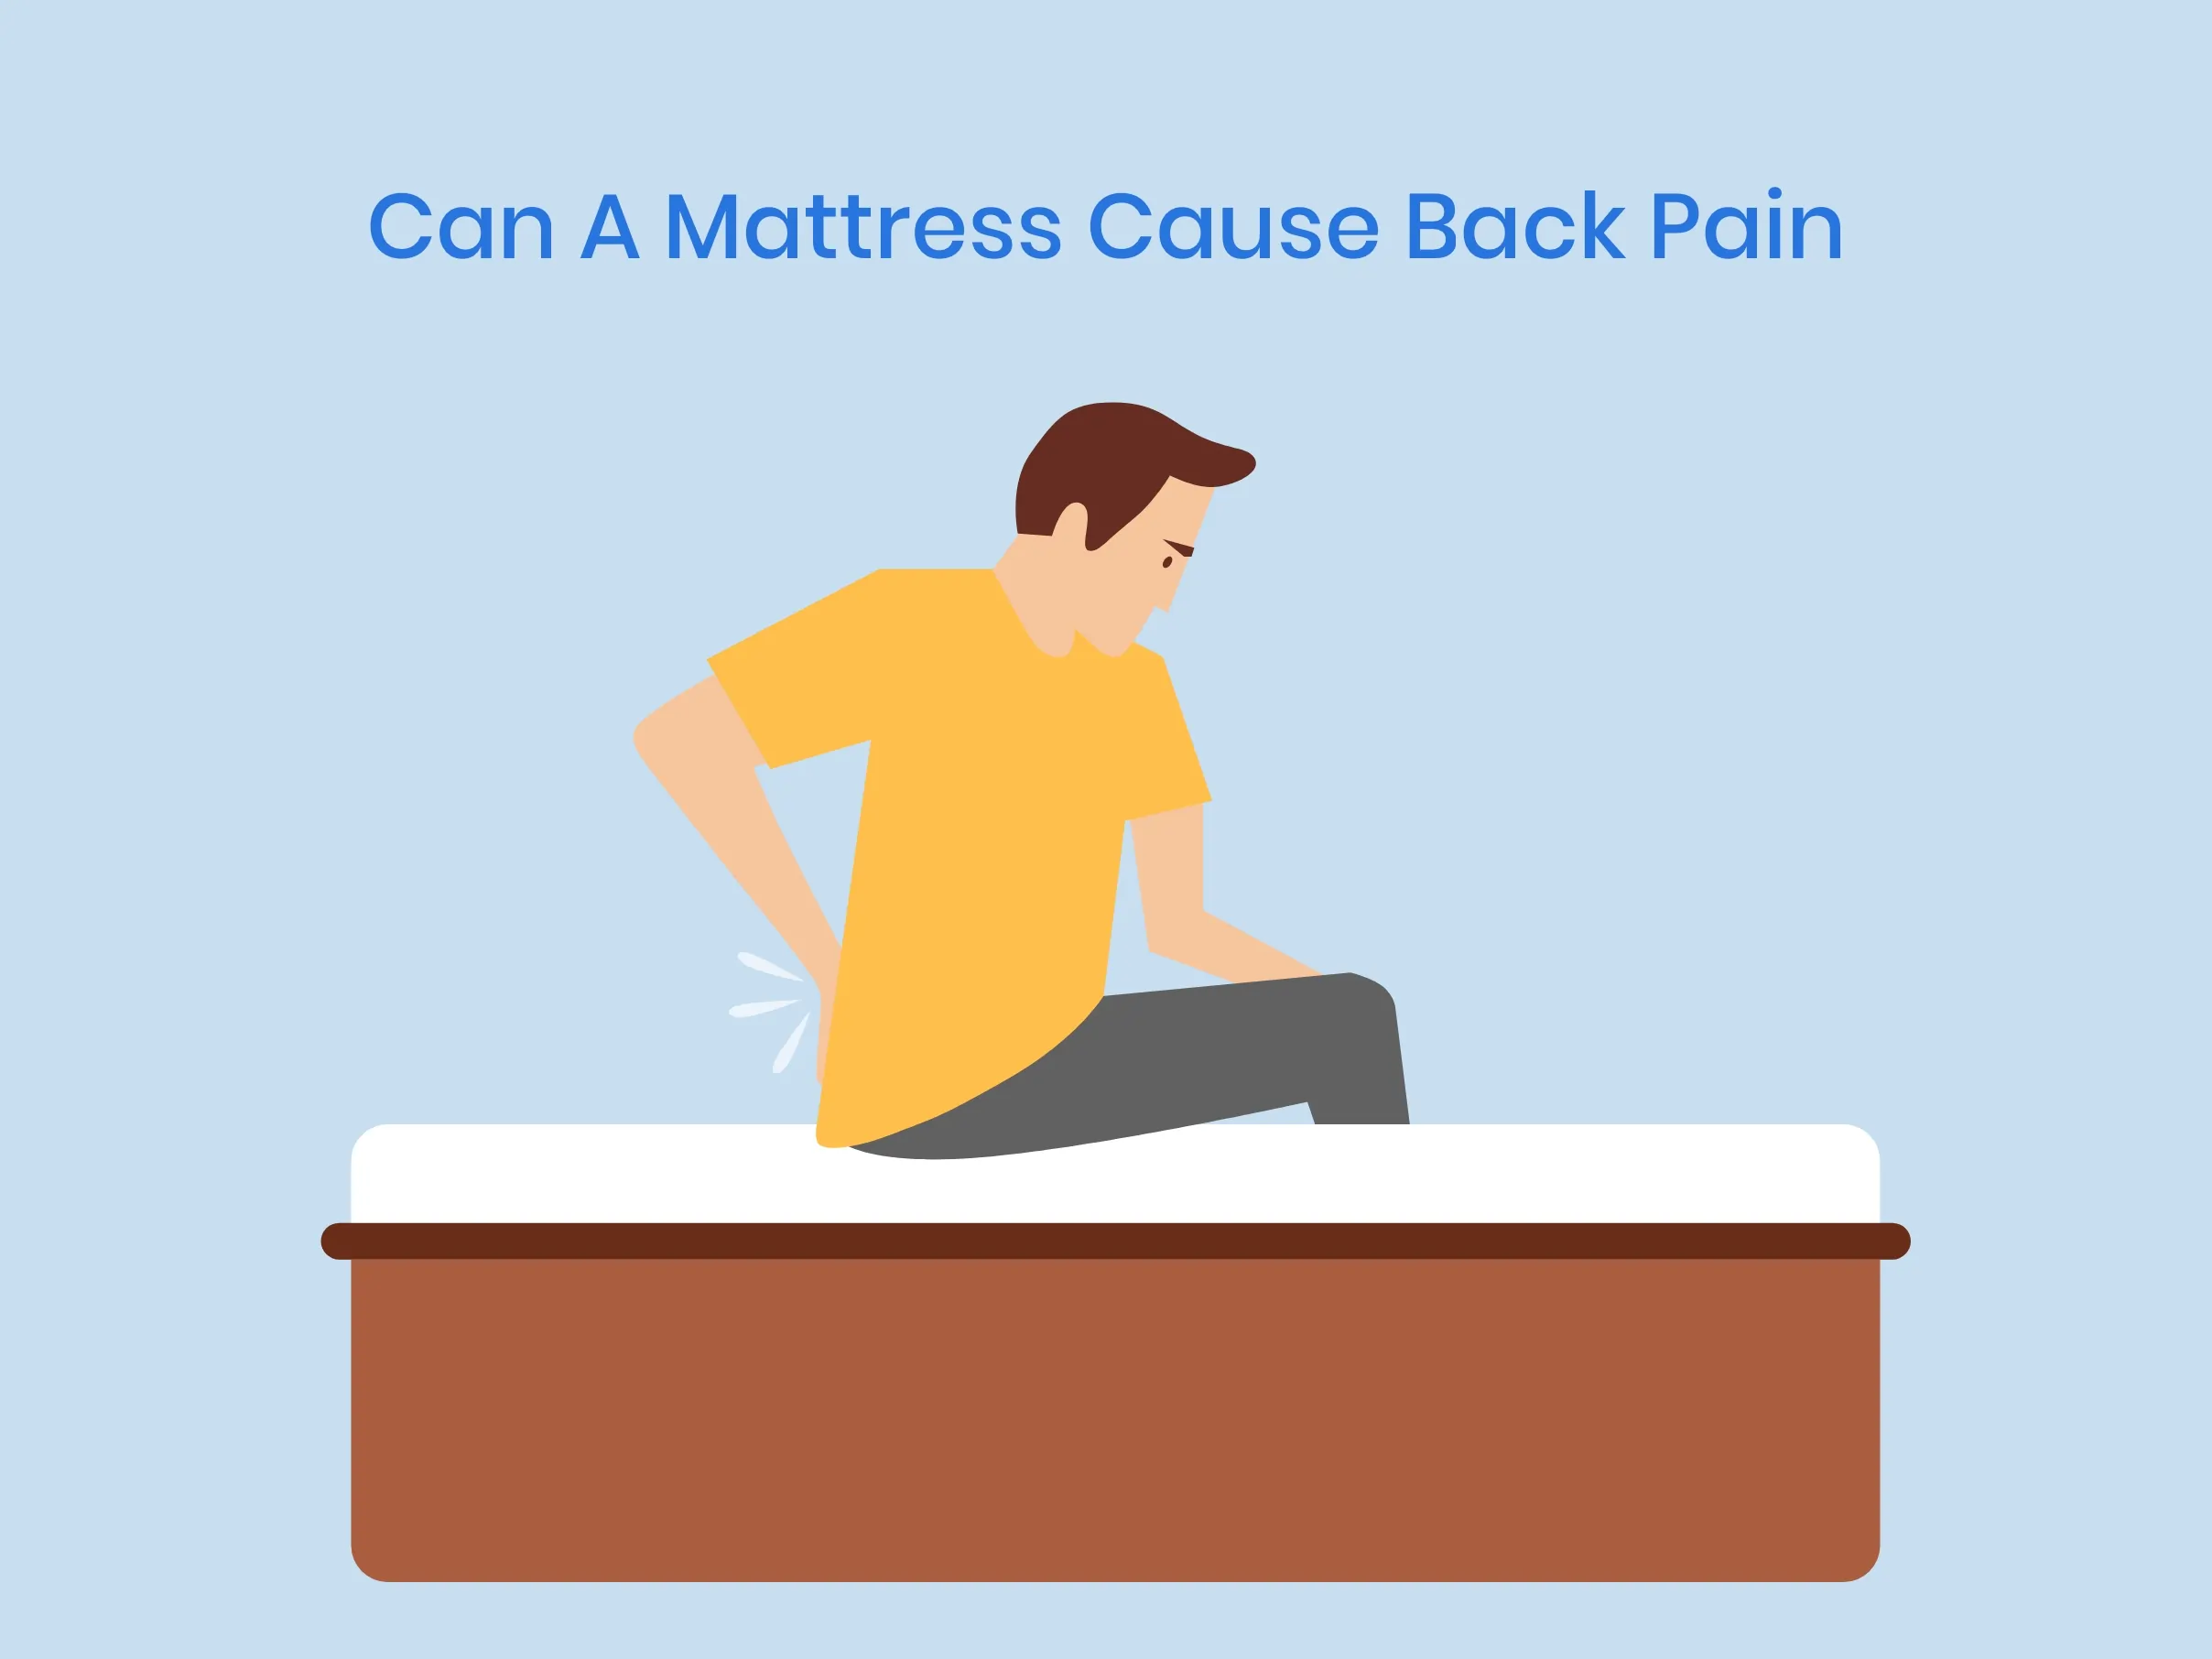 Illustration of Mattress To Help Manage Back Pain